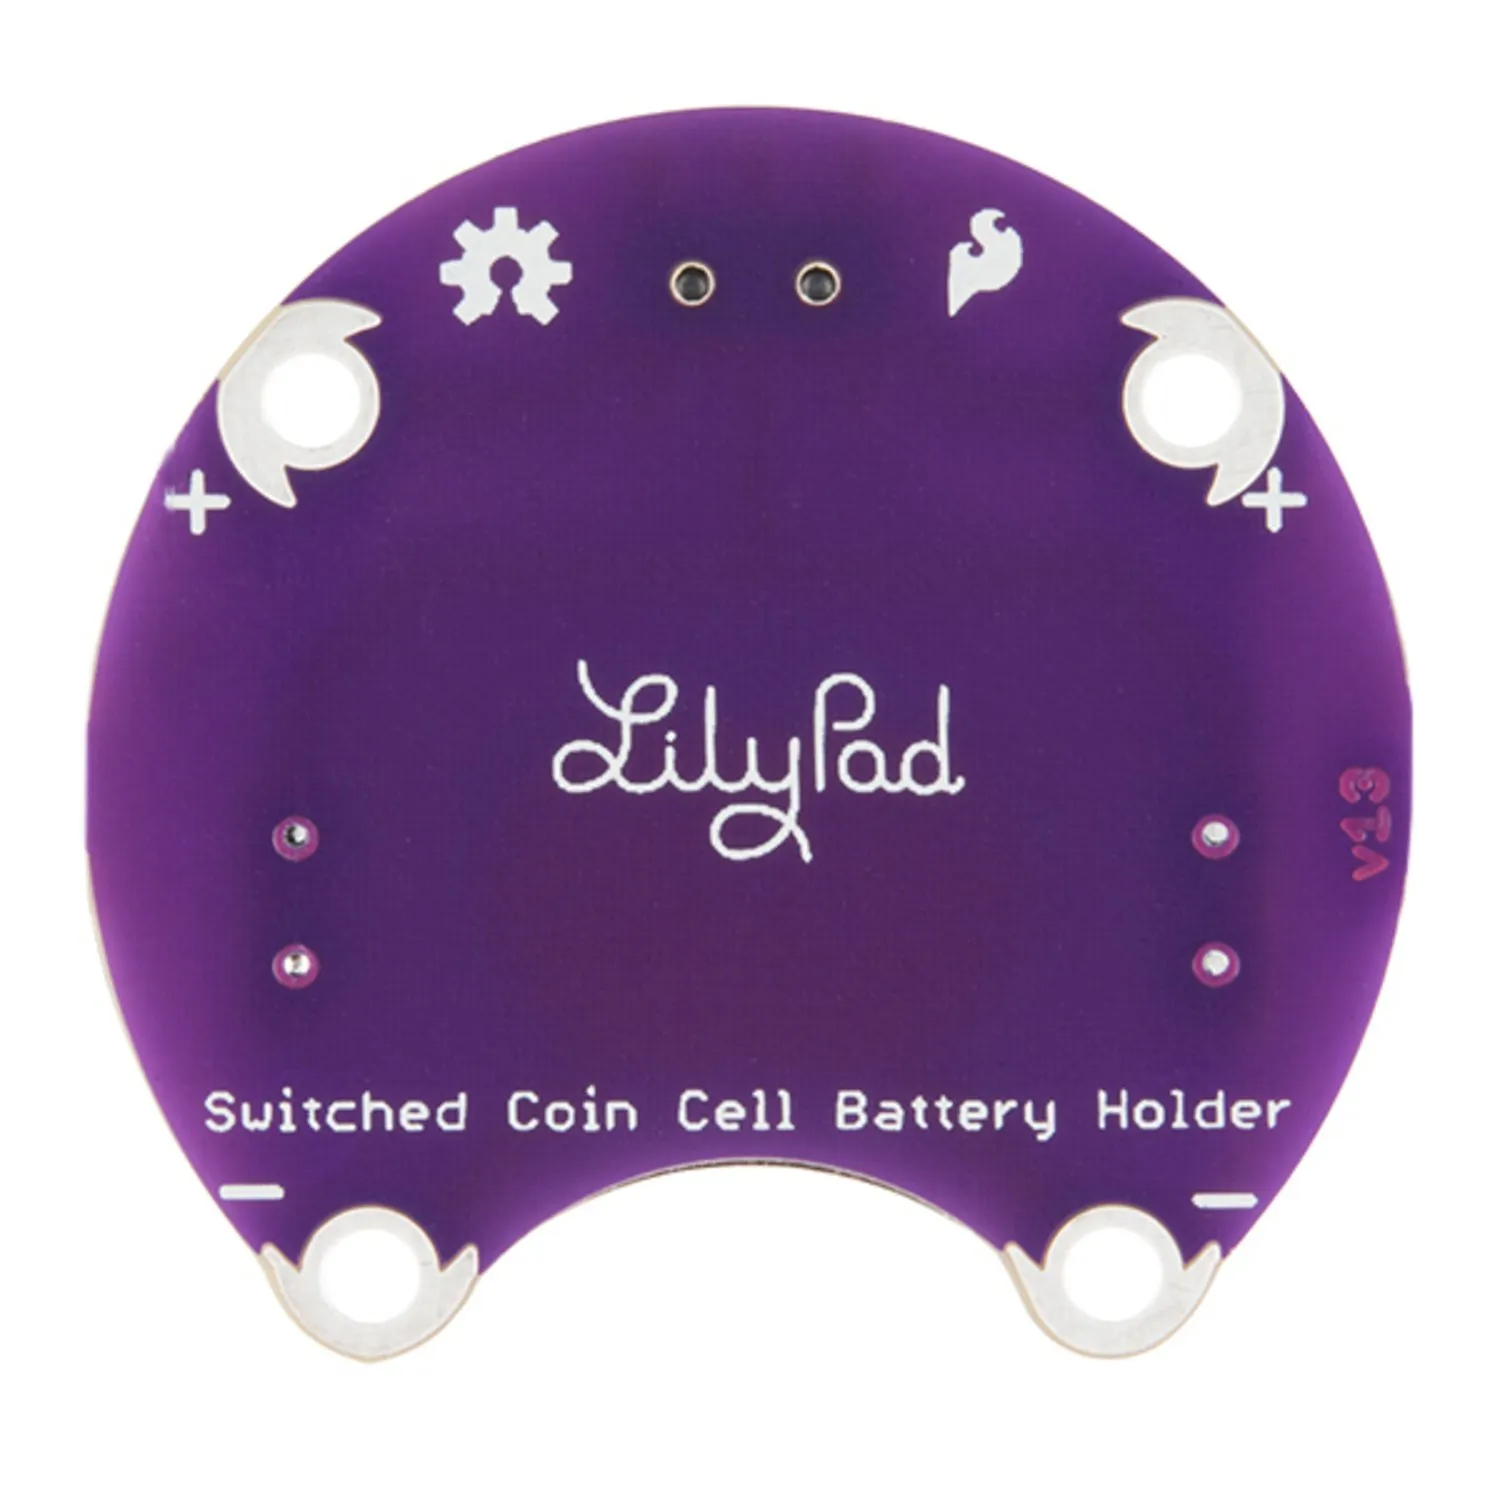 Photo of Coin Cell Battery Holder - Switched for Lilypad - 20mm 